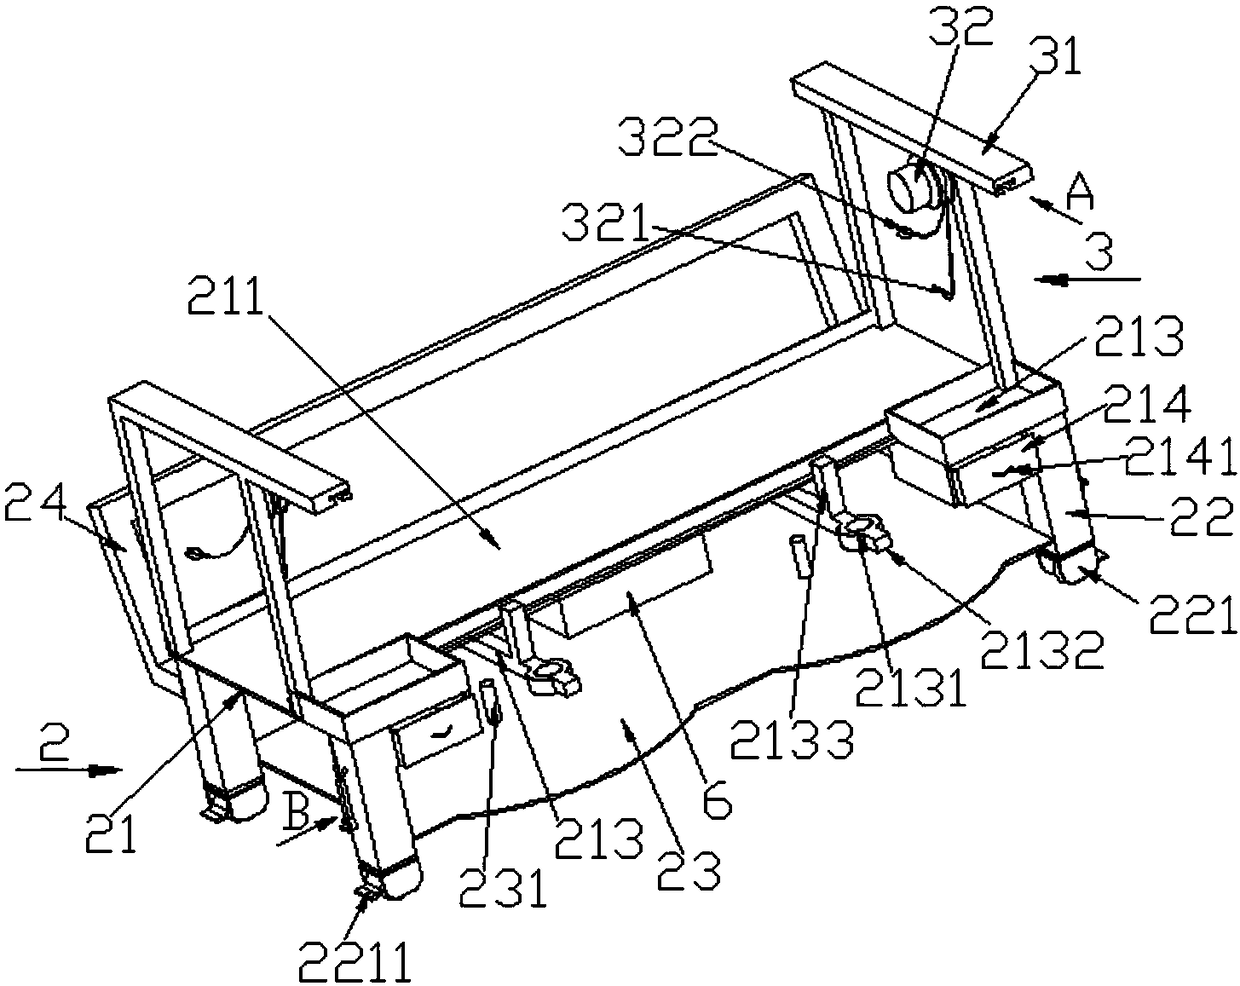 Corrugated plate carrying and mounting cart with electric wrenches